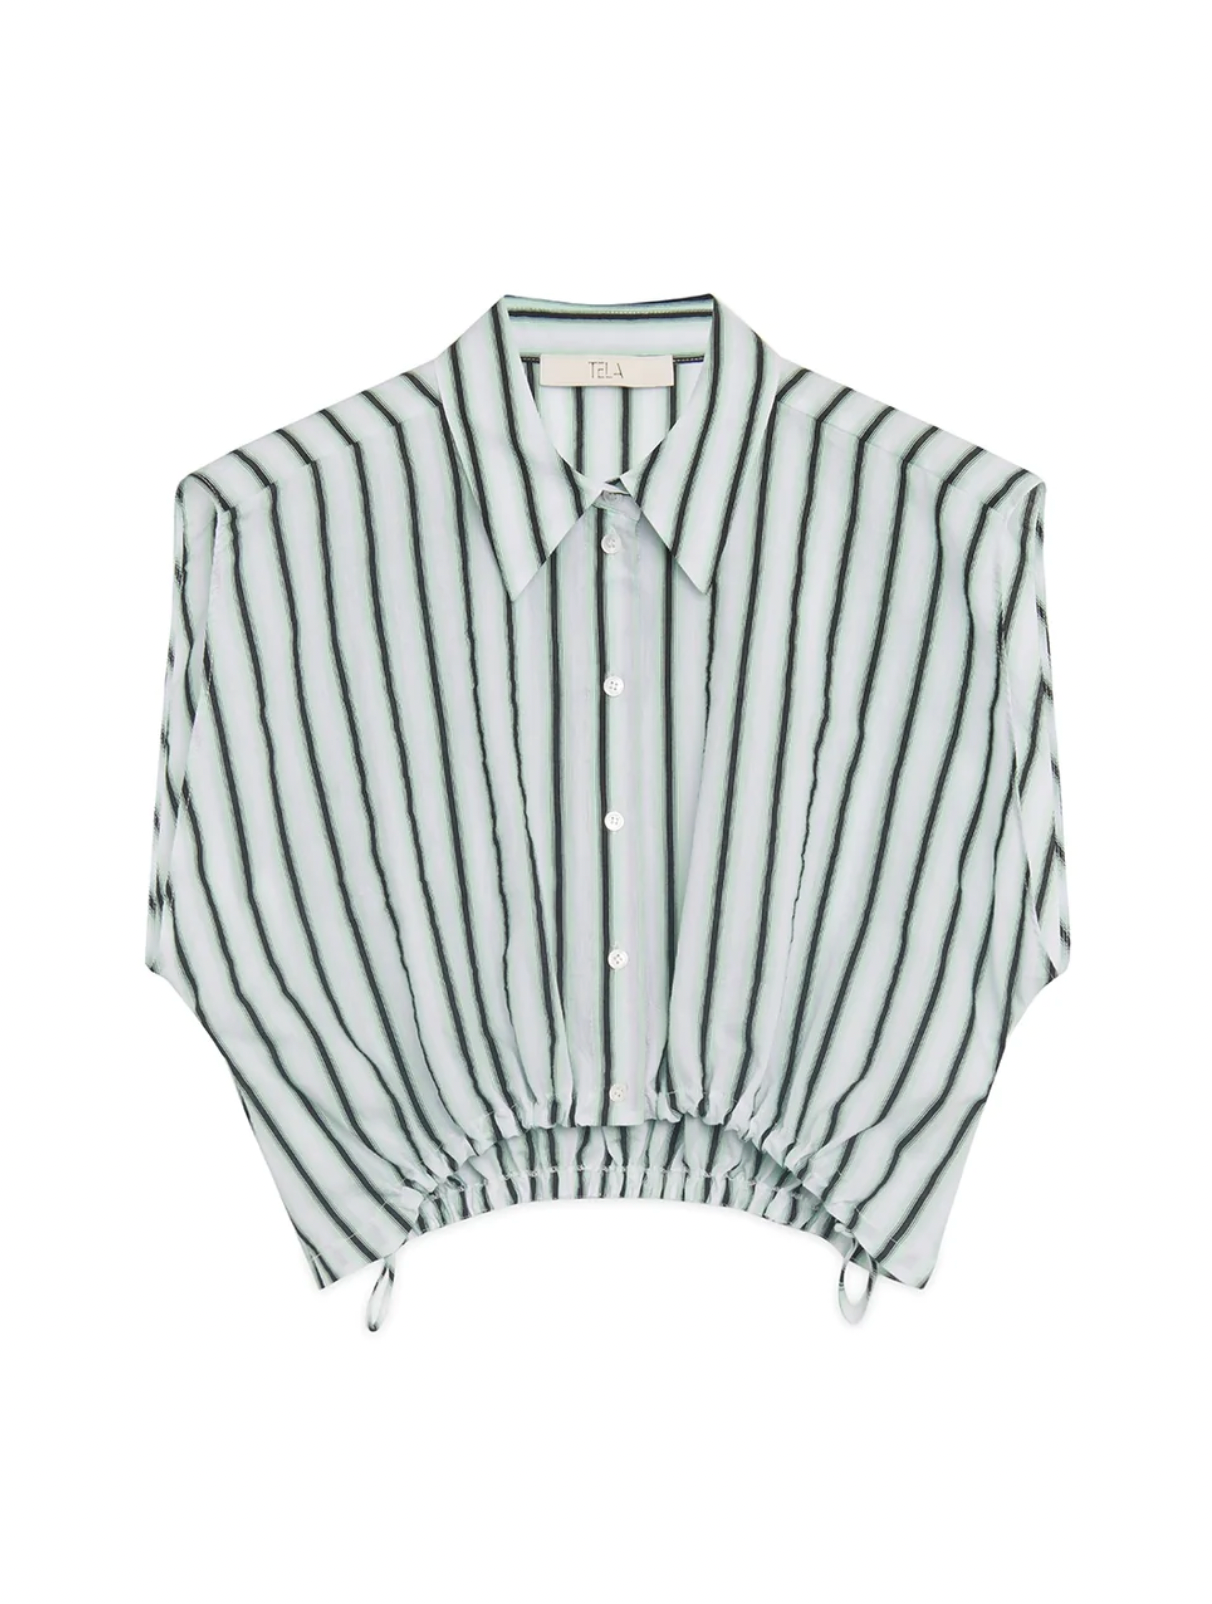 Parry Top-White/Green Stripe